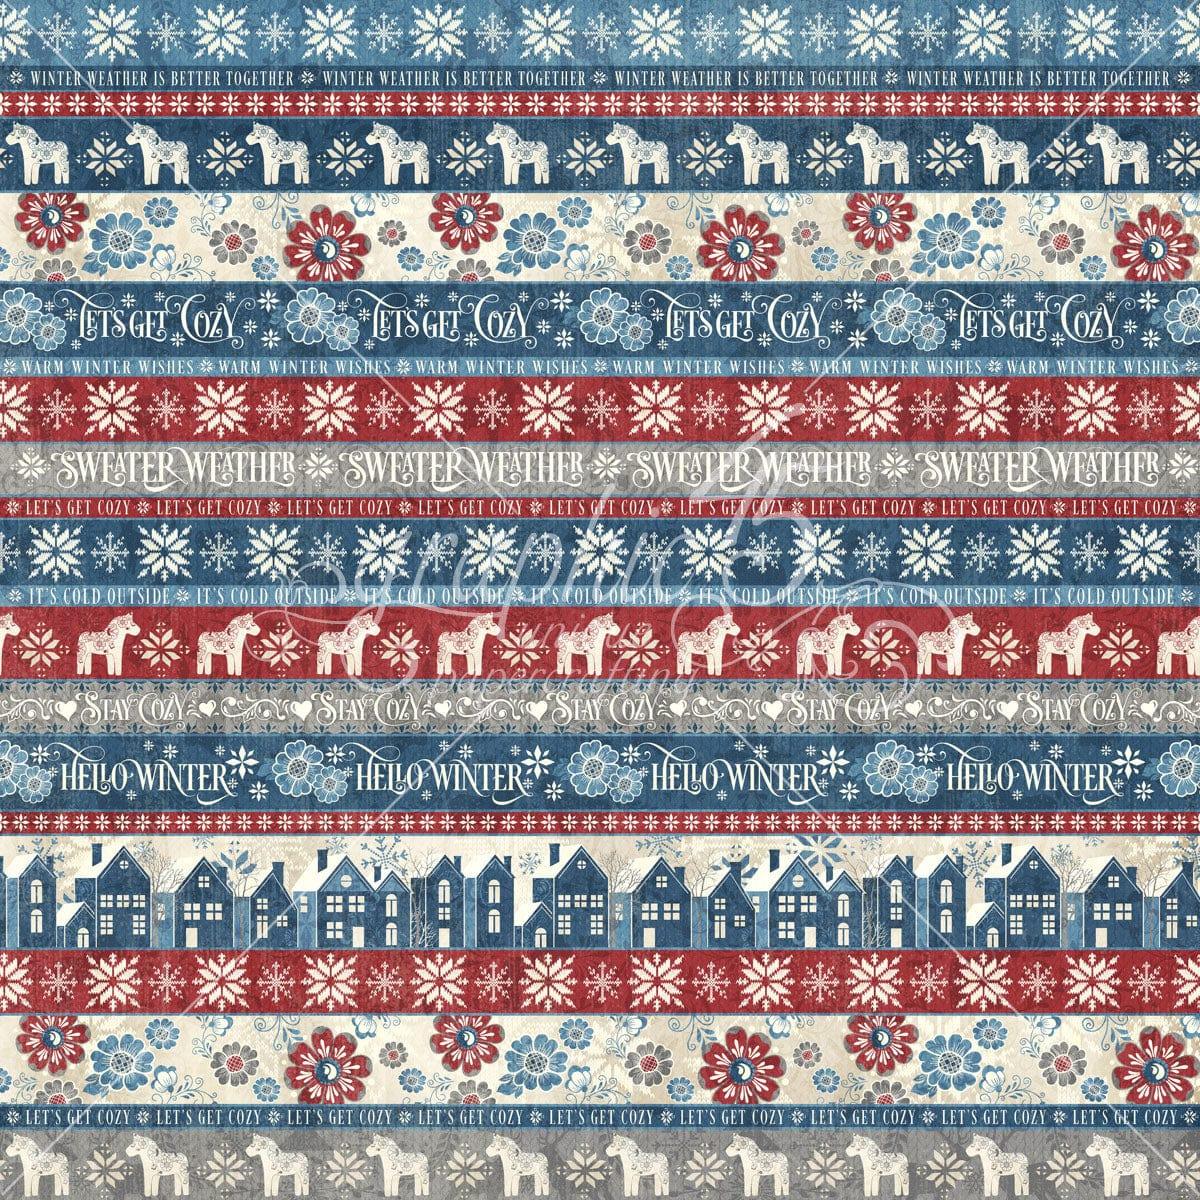 Let's Get Cozy Collection Hello Winter 12 x 12 Double-Sided Scrapbook Paper by Graphic 45 - Scrapbook Supply Companies